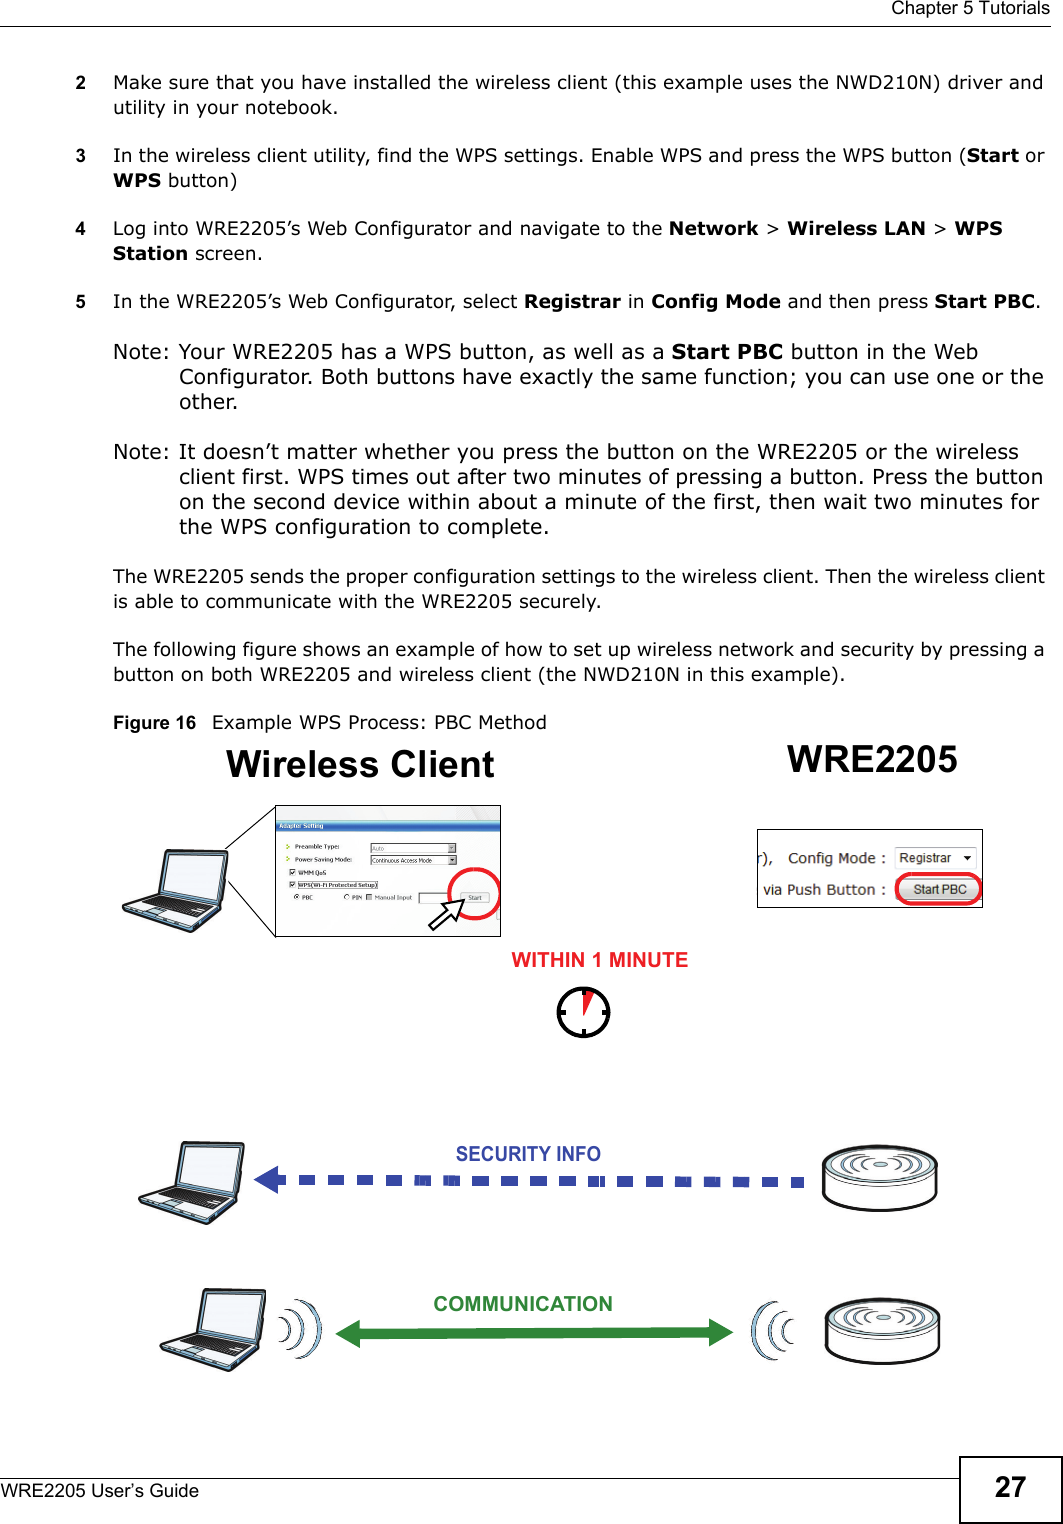  Chapter 5 TutorialsWRE2205 User’s Guide 272Make sure that you have installed the wireless client (this example uses the NWD210N) driver and utility in your notebook.3In the wireless client utility, find the WPS settings. Enable WPS and press the WPS button (Start or WPS button)4Log into WRE2205’s Web Configurator and navigate to the Network &gt; Wireless LAN &gt; WPS Station screen. 5In the WRE2205’s Web Configurator, select Registrar in Config Mode and then press Start PBC.Note: Your WRE2205 has a WPS button, as well as a Start PBC button in the Web Configurator. Both buttons have exactly the same function; you can use one or the other.Note: It doesn’t matter whether you press the button on the WRE2205 or the wireless client first. WPS times out after two minutes of pressing a button. Press the button on the second device within about a minute of the first, then wait two minutes for the WPS configuration to complete. The WRE2205 sends the proper configuration settings to the wireless client. Then the wireless client is able to communicate with the WRE2205 securely. The following figure shows an example of how to set up wireless network and security by pressing a button on both WRE2205 and wireless client (the NWD210N in this example).Figure 16   Example WPS Process: PBC MethodWireless Client WRE2205SECURITY INFOCOMMUNICATIONWITHIN 1 MINUTE